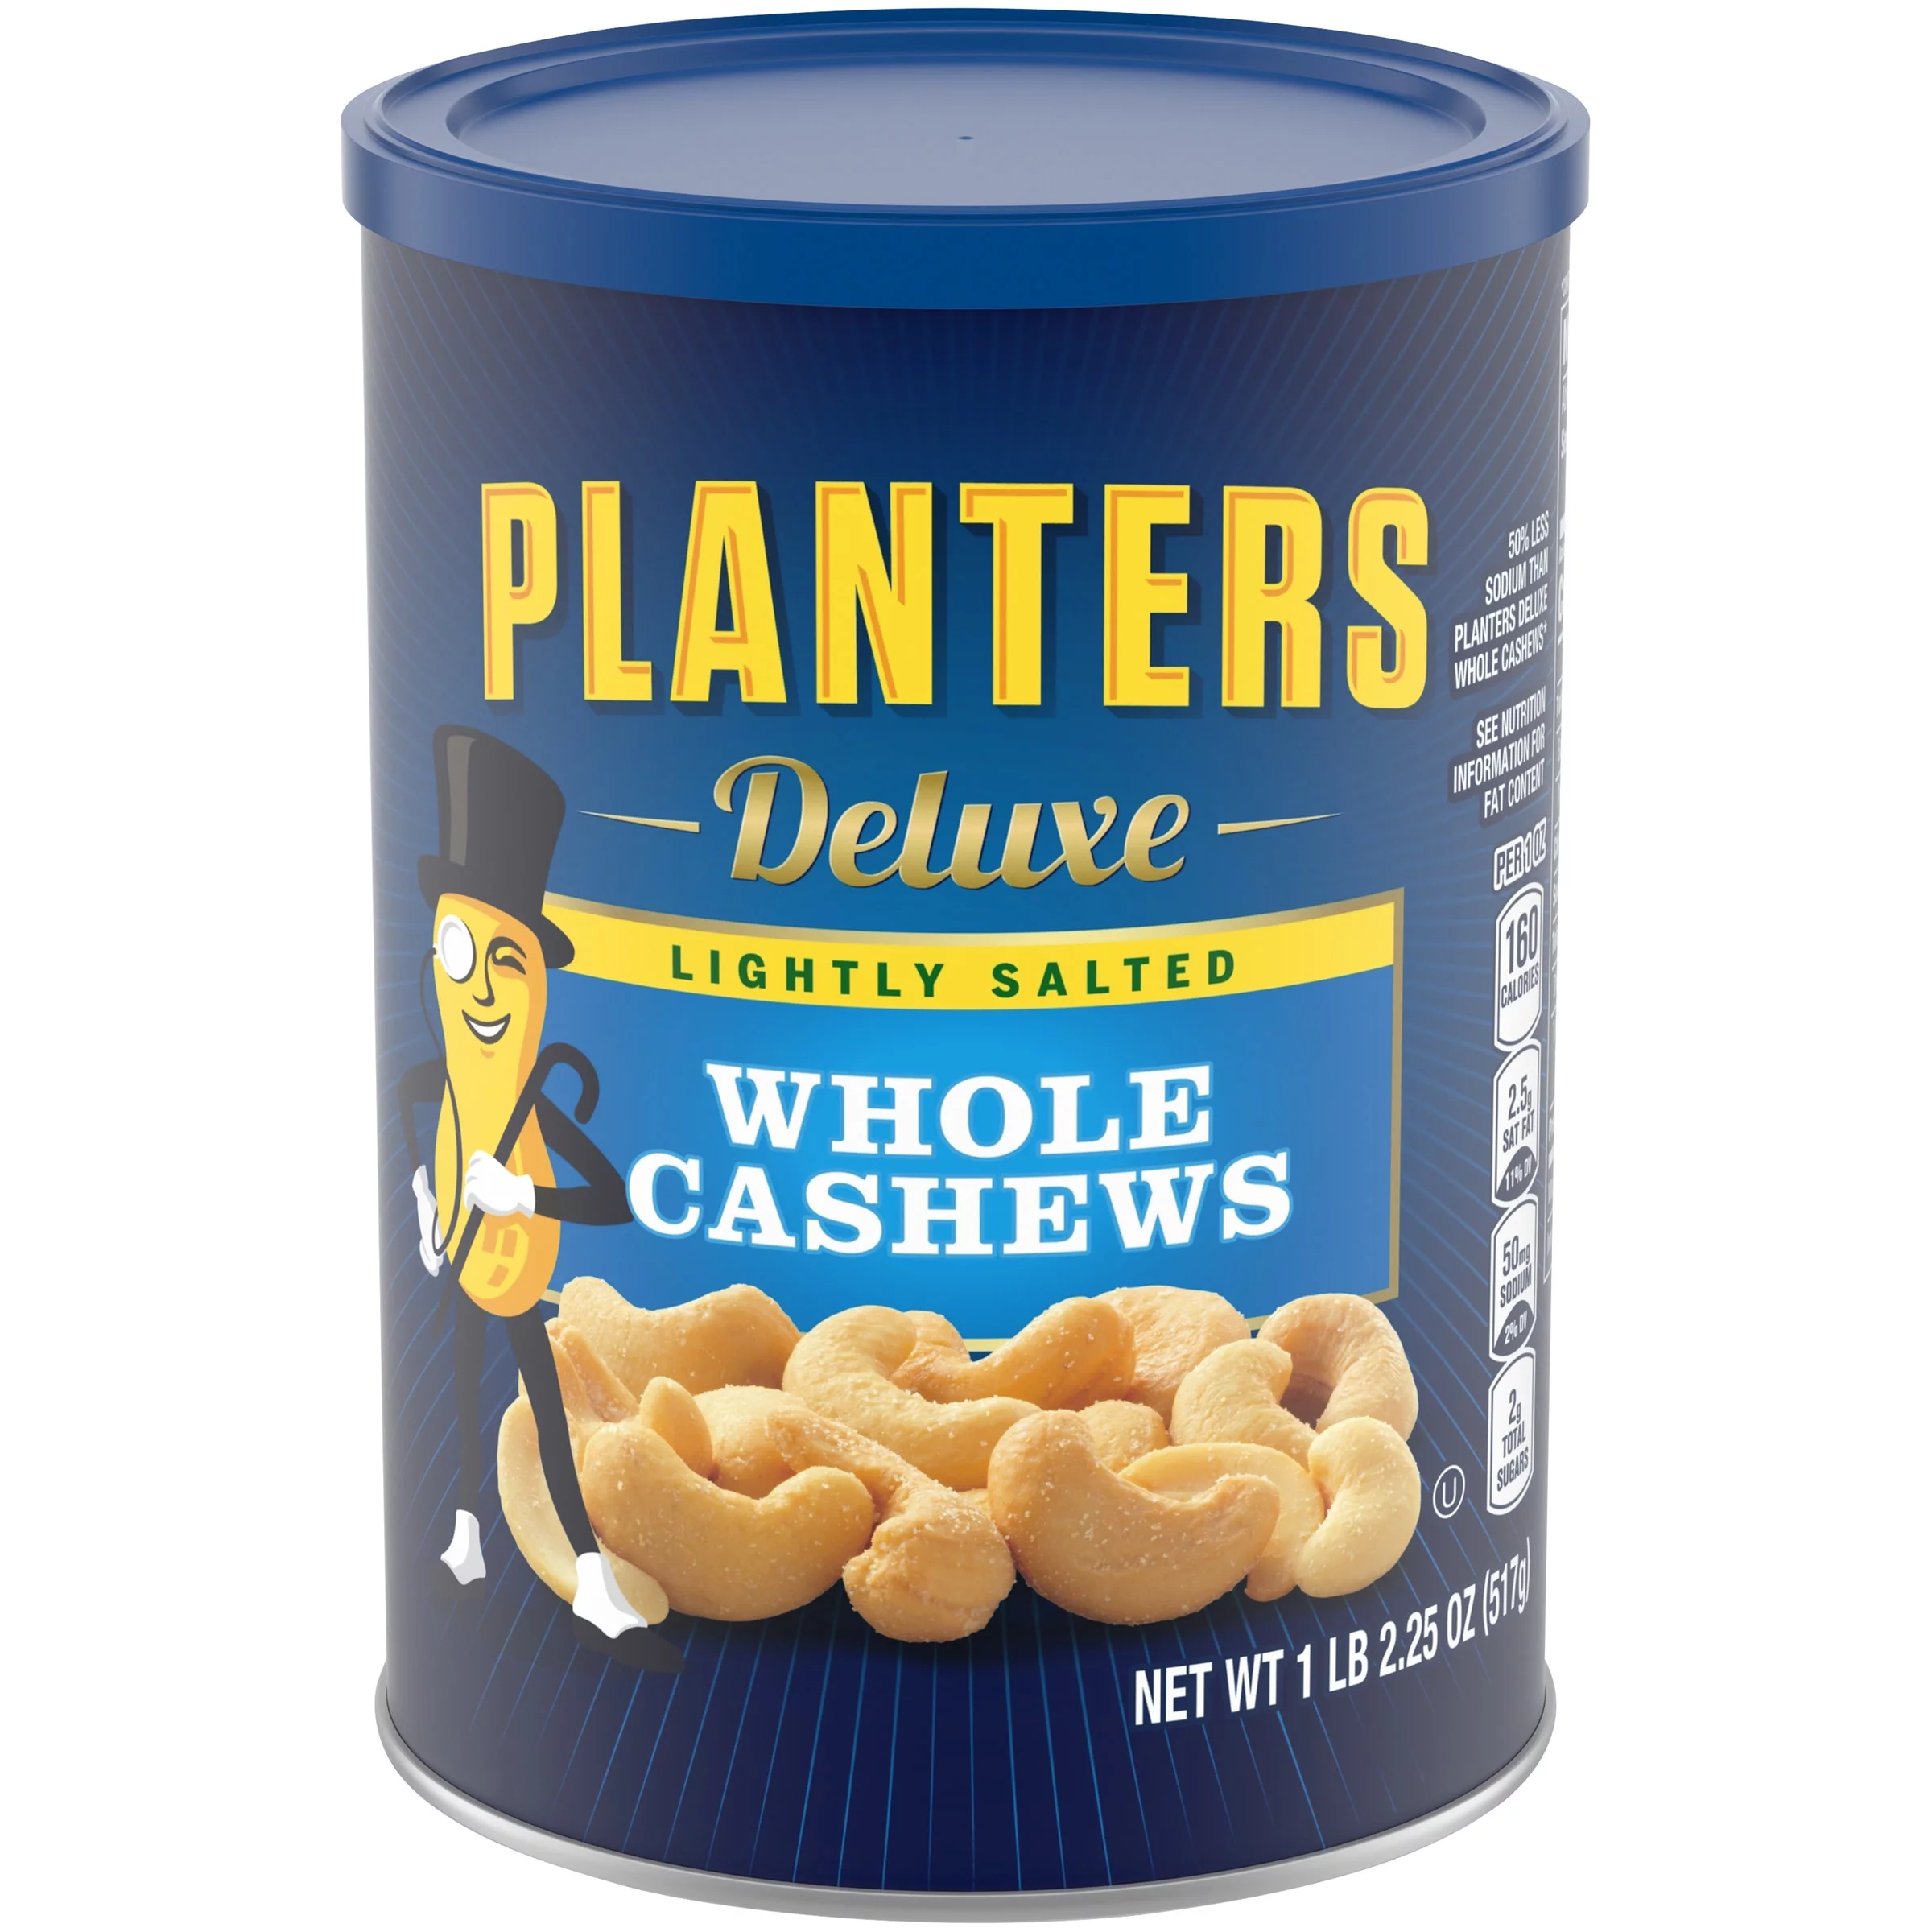 PLANTERS Deluxe Lightly Salted Whole Cashews, Party Snacks, Plant-Based Protein 18.25oz (1 Canister)